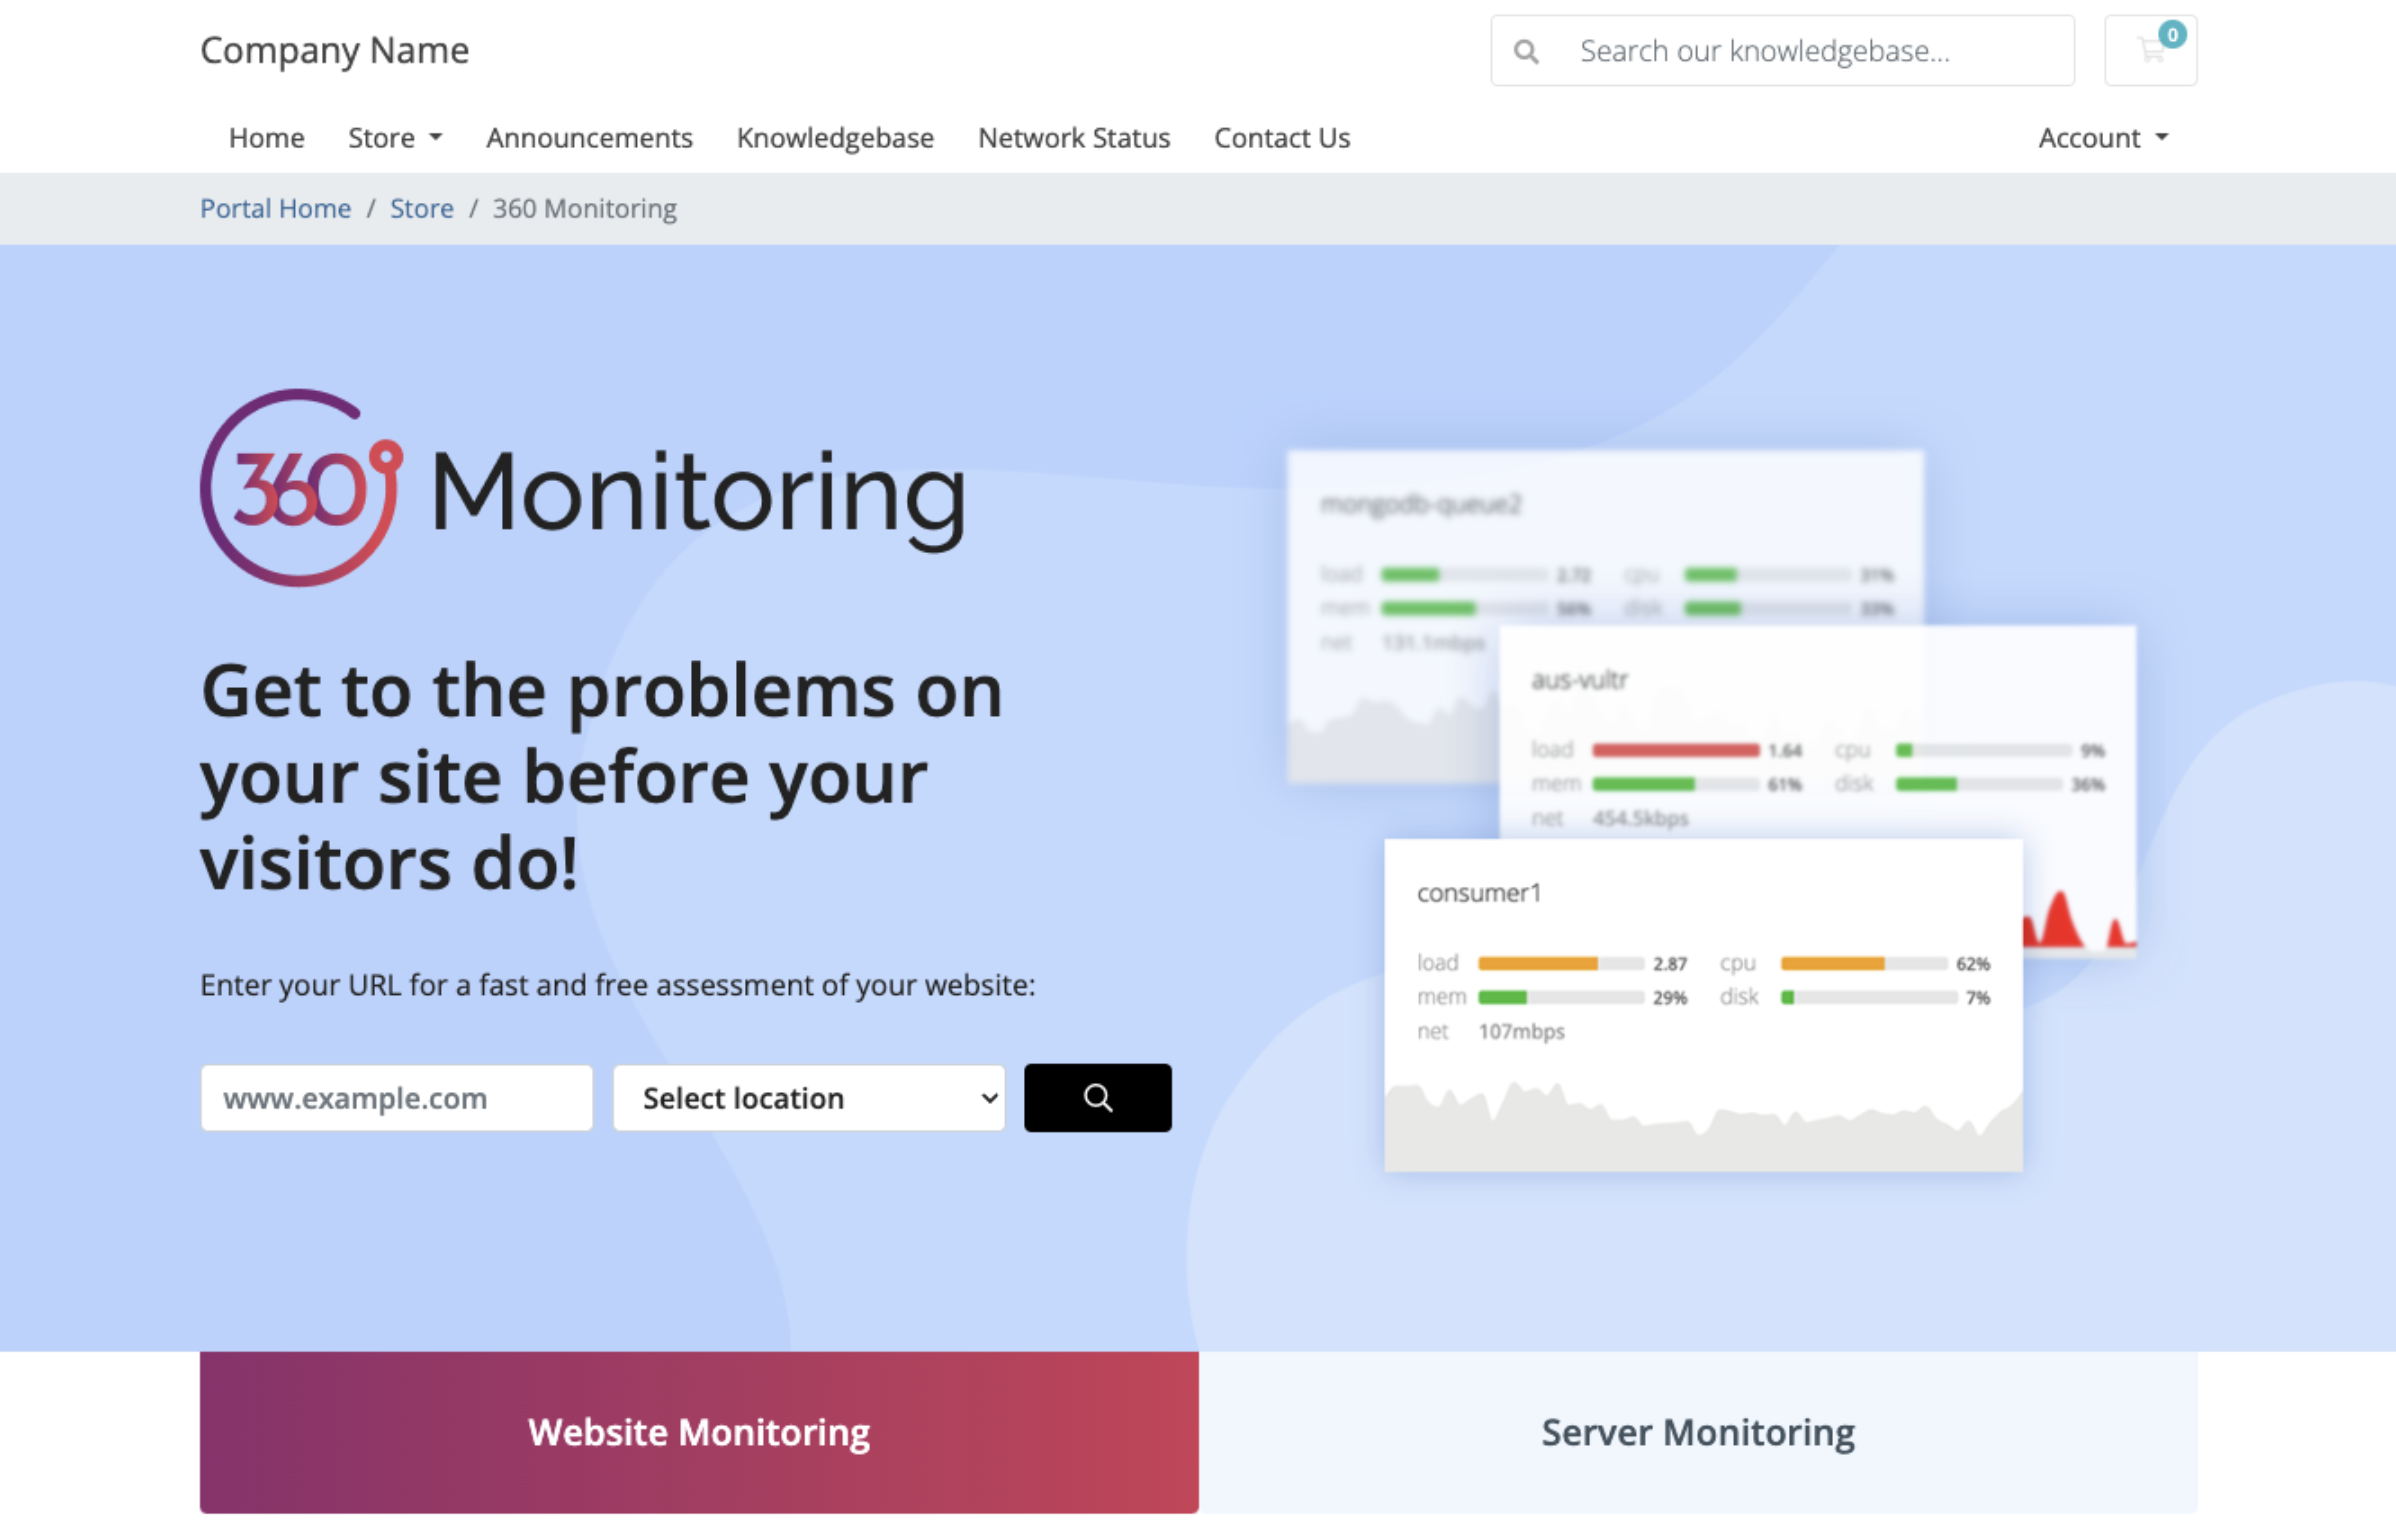 The 360 Monitoring landing page in the Client Area